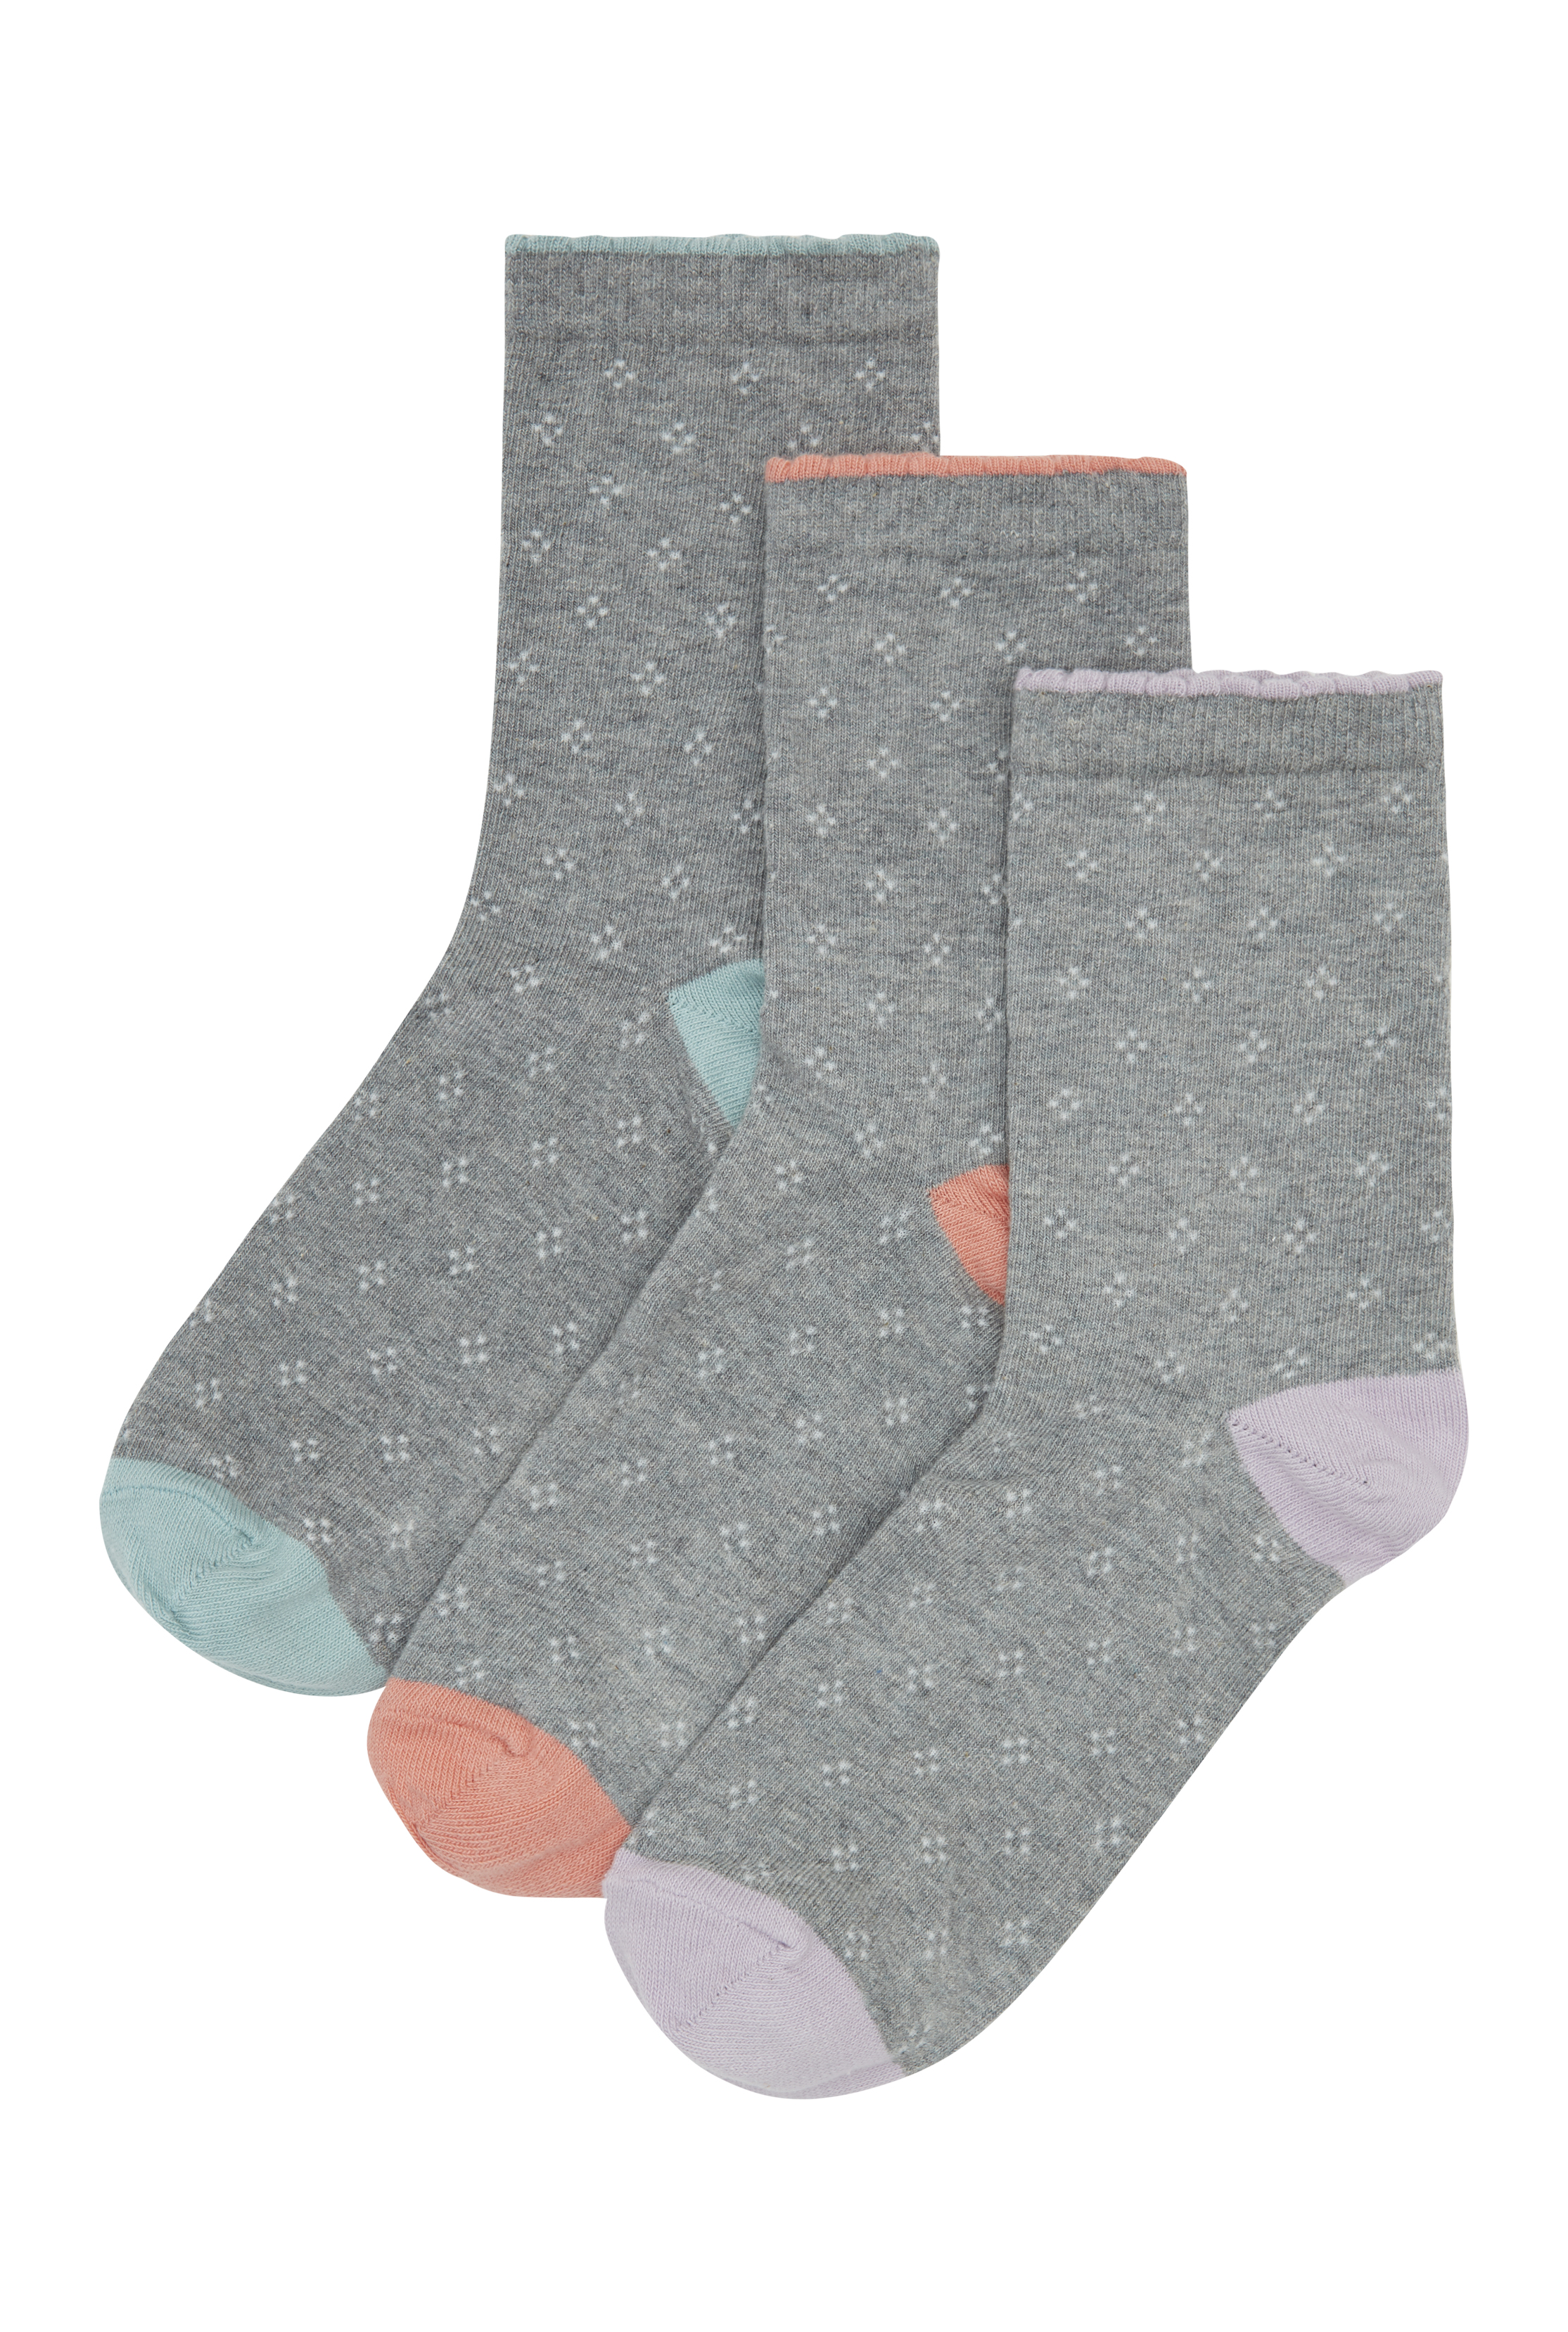 3 PACK Grey Colour Pop Cotton Ankle Socks | Long Tall Sally